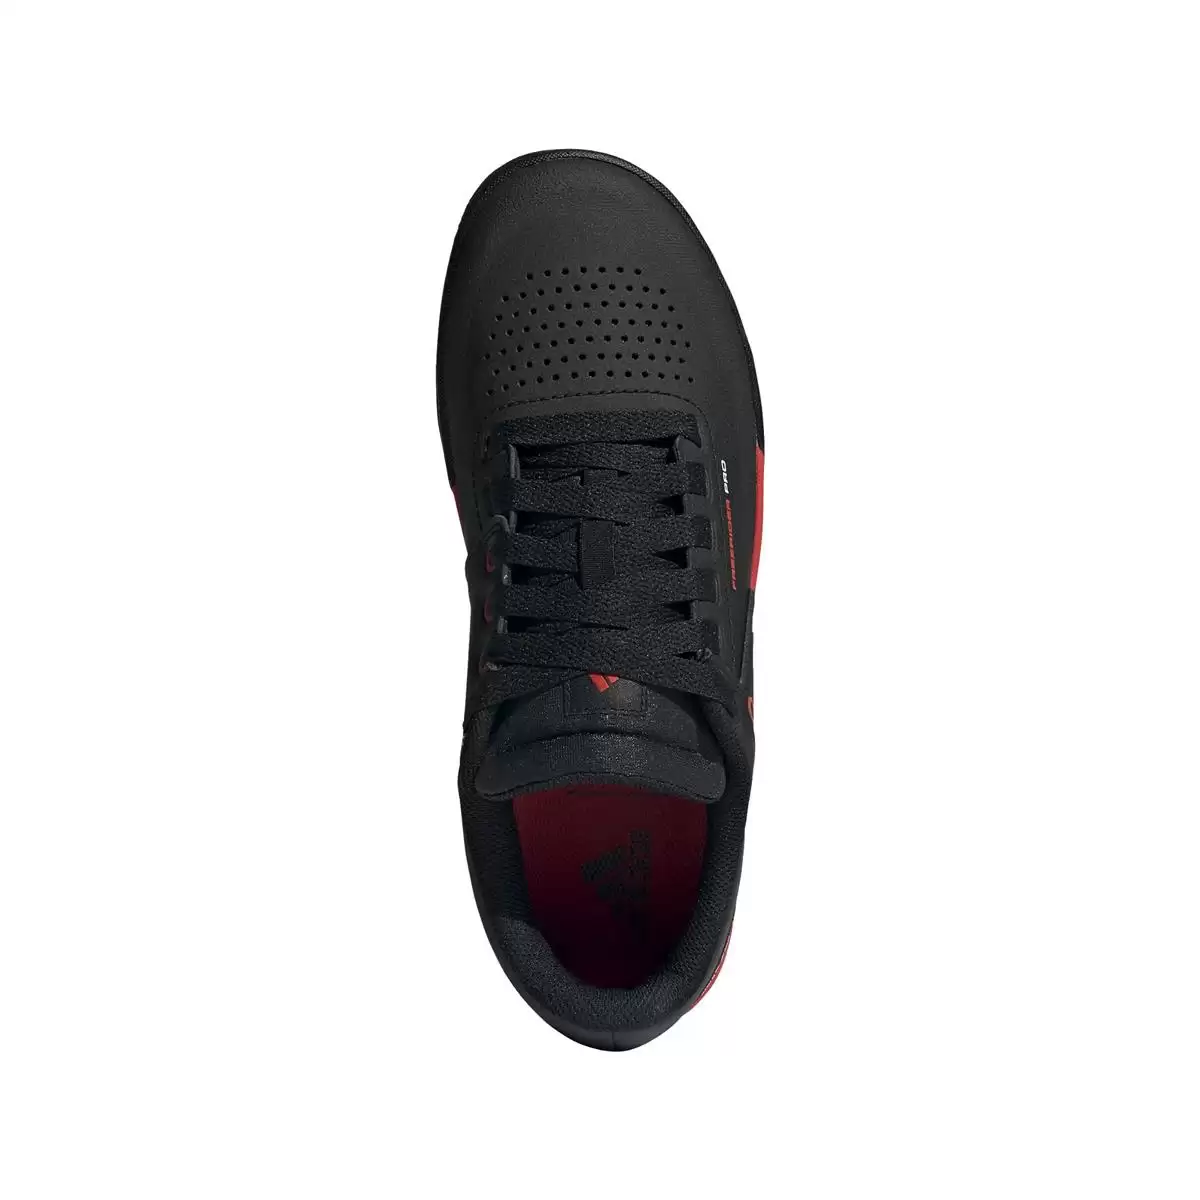 Chaussures Plates VTT Freerider Pro Noir/Rouge Taille 44 #4